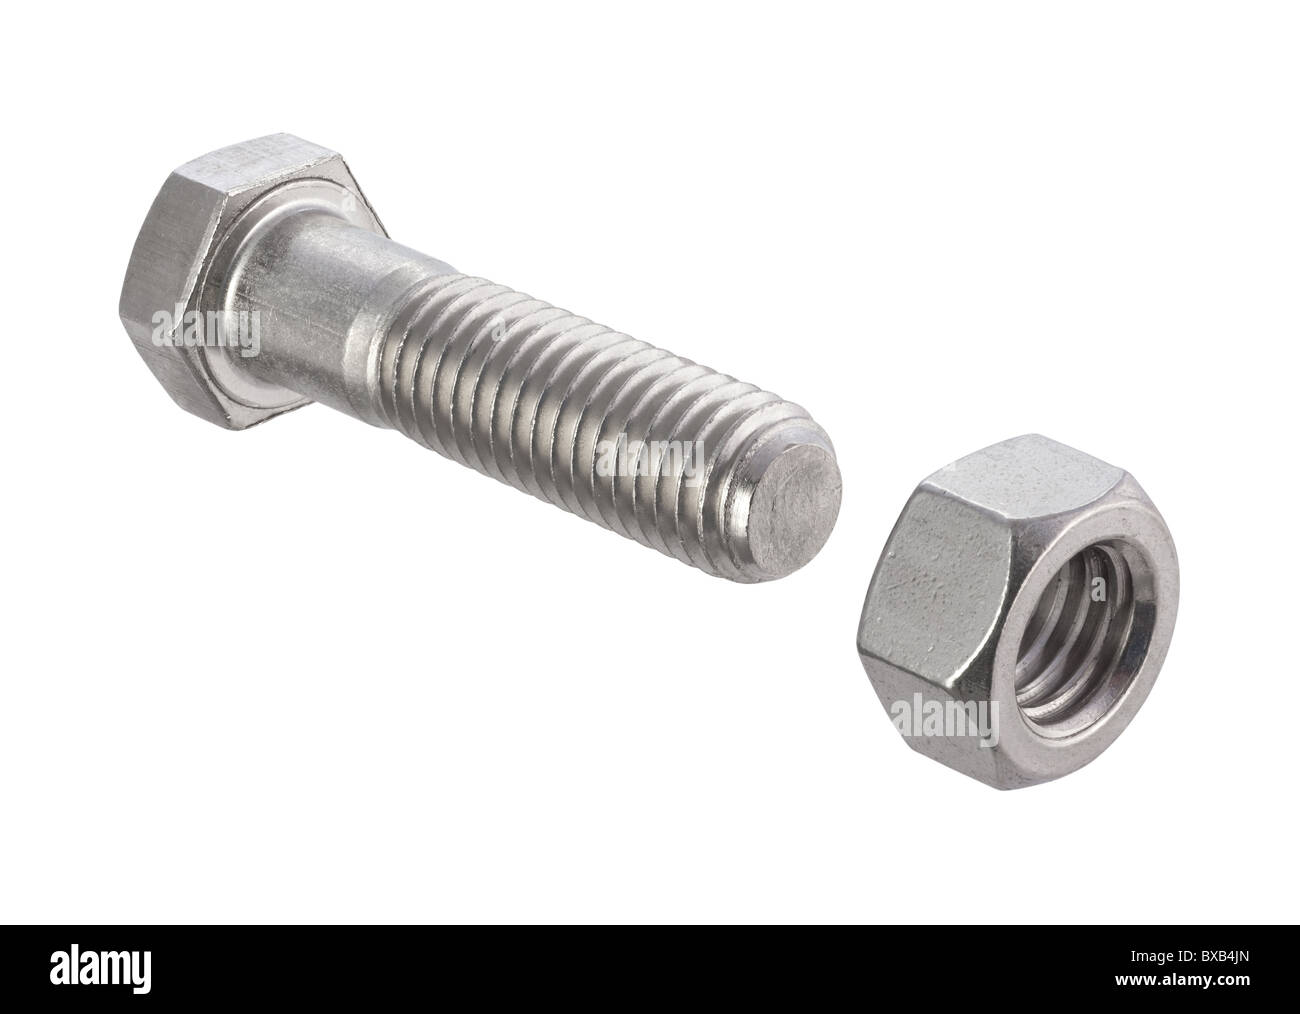 Nut and Bolt isolated on a white background Stock Photo